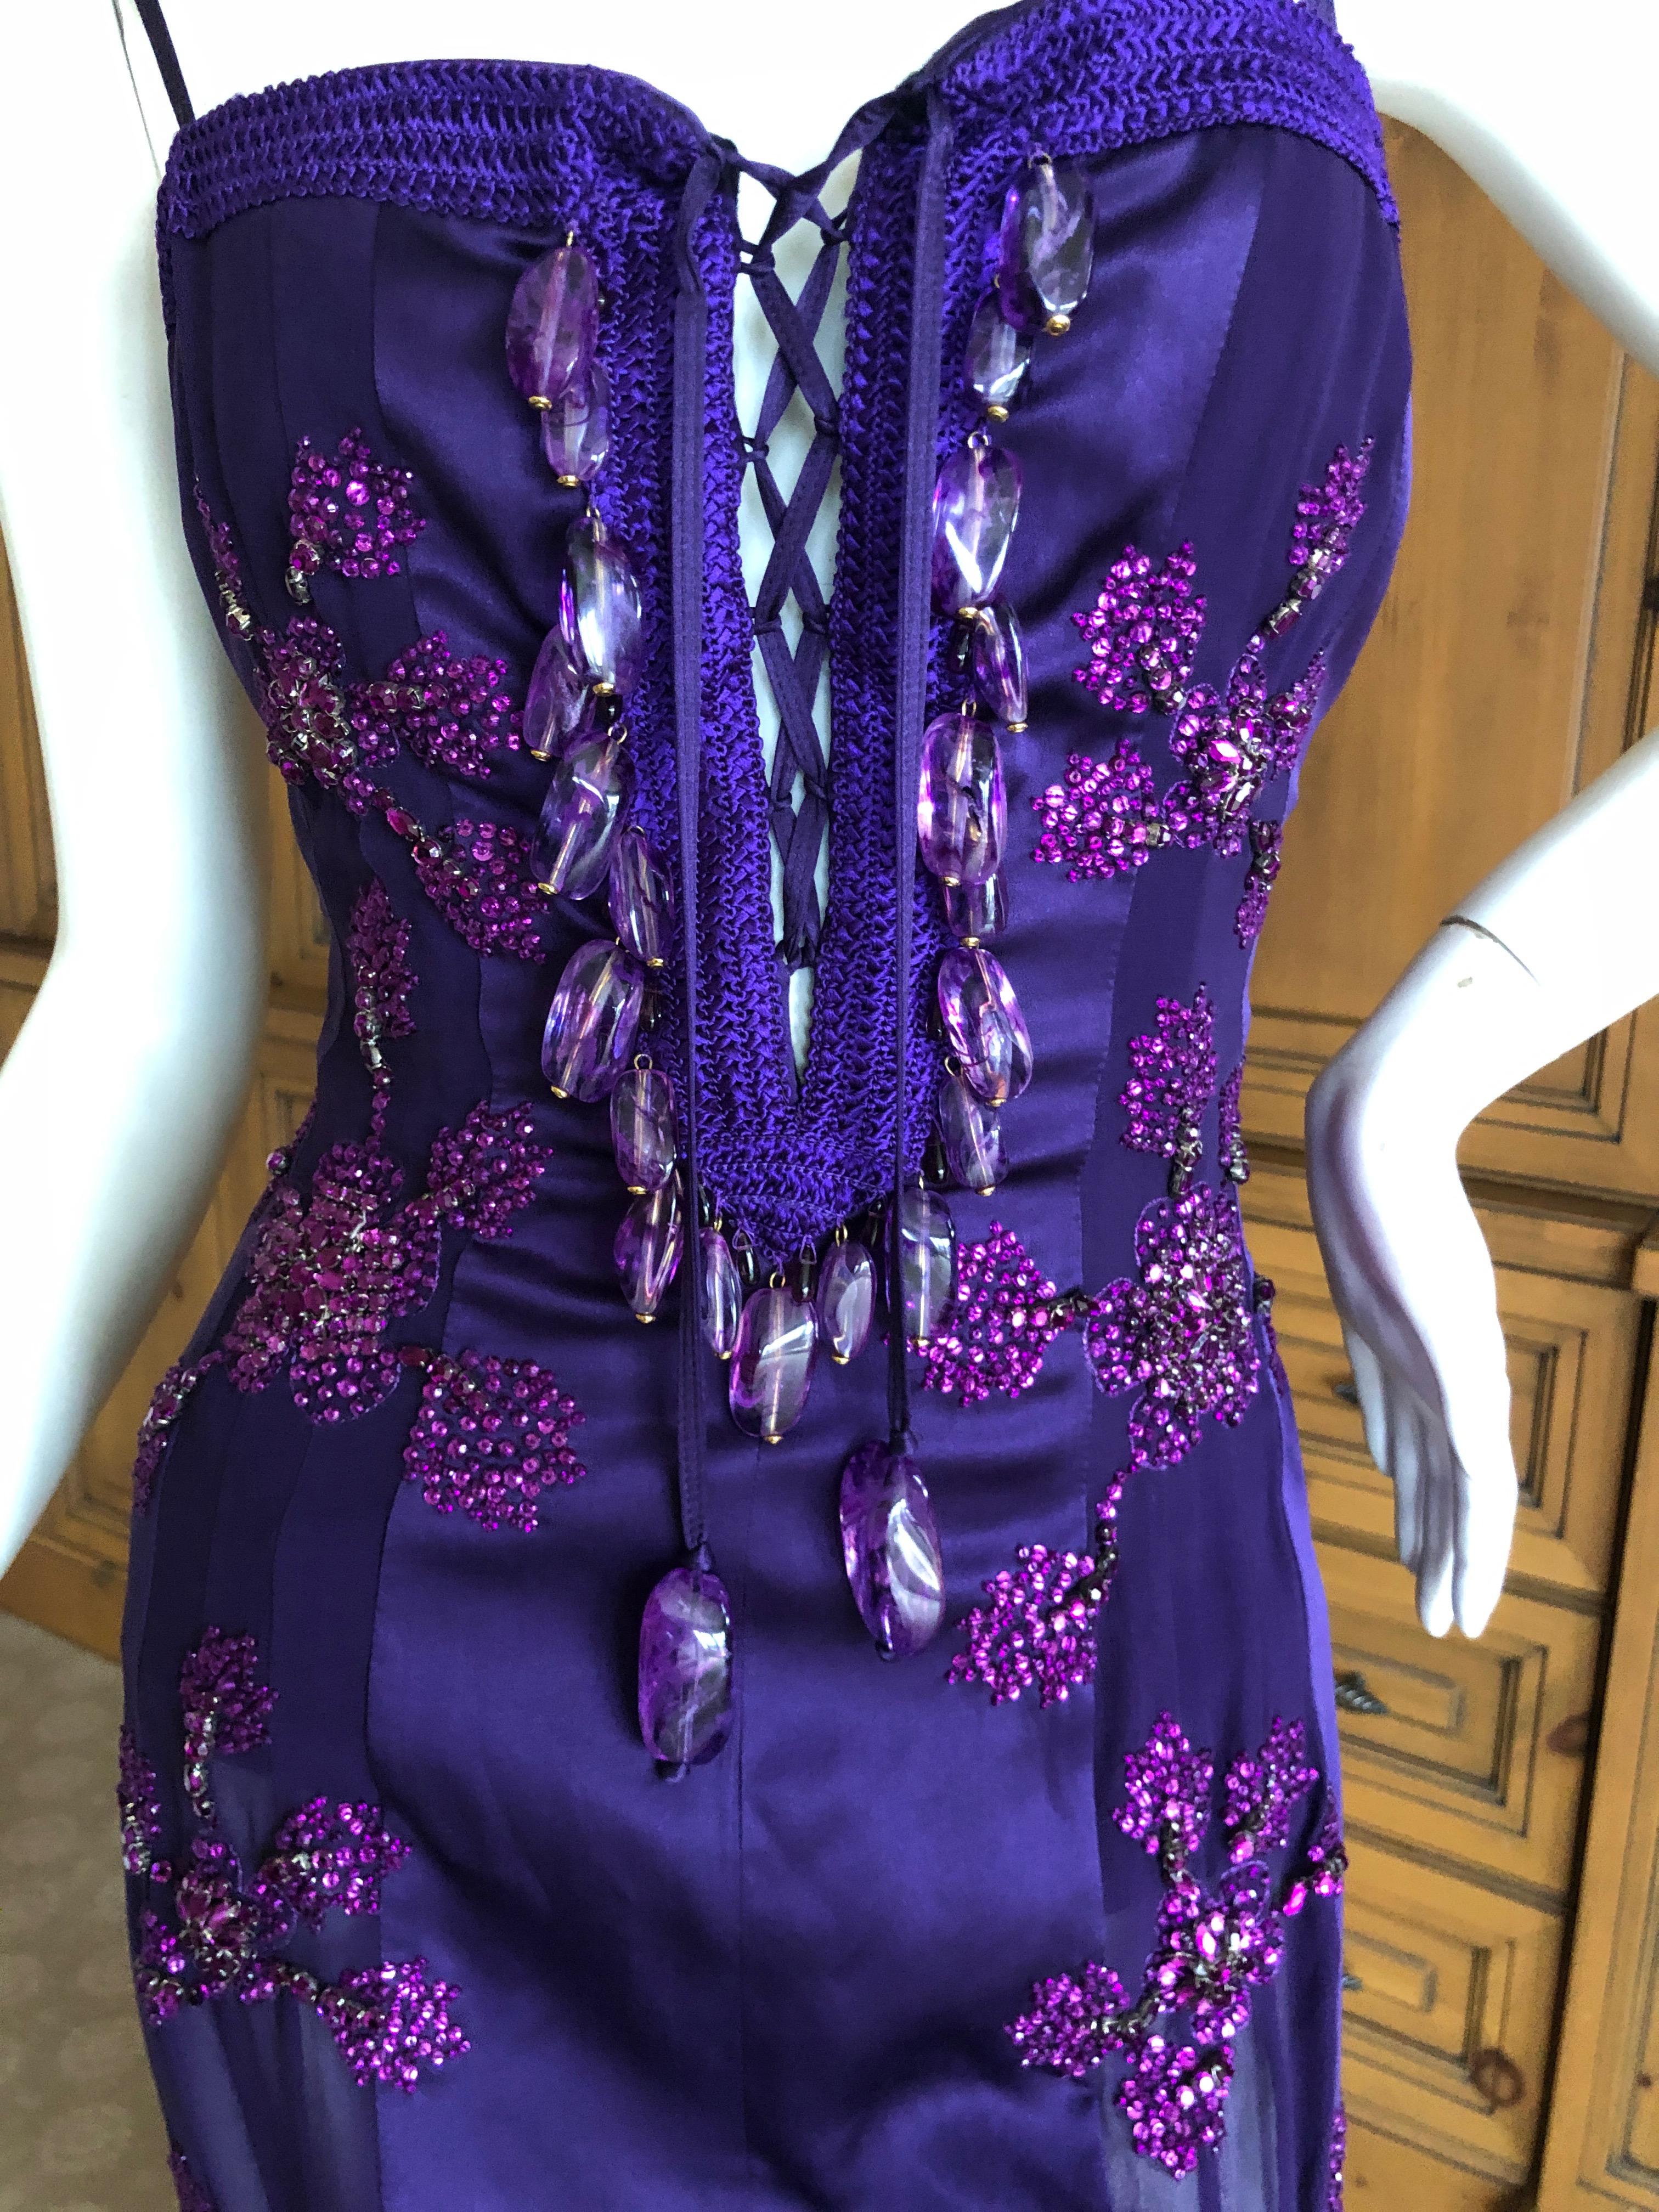 Emanuel Ungaro Amethyst Embellished Vintage Silk Evening Dress by Peter Dundas.
This is such a charming piece, please use the zoom feature to see the bead details.
There is no size tag, I would estimate it to be size 42 Fr

Bust  36